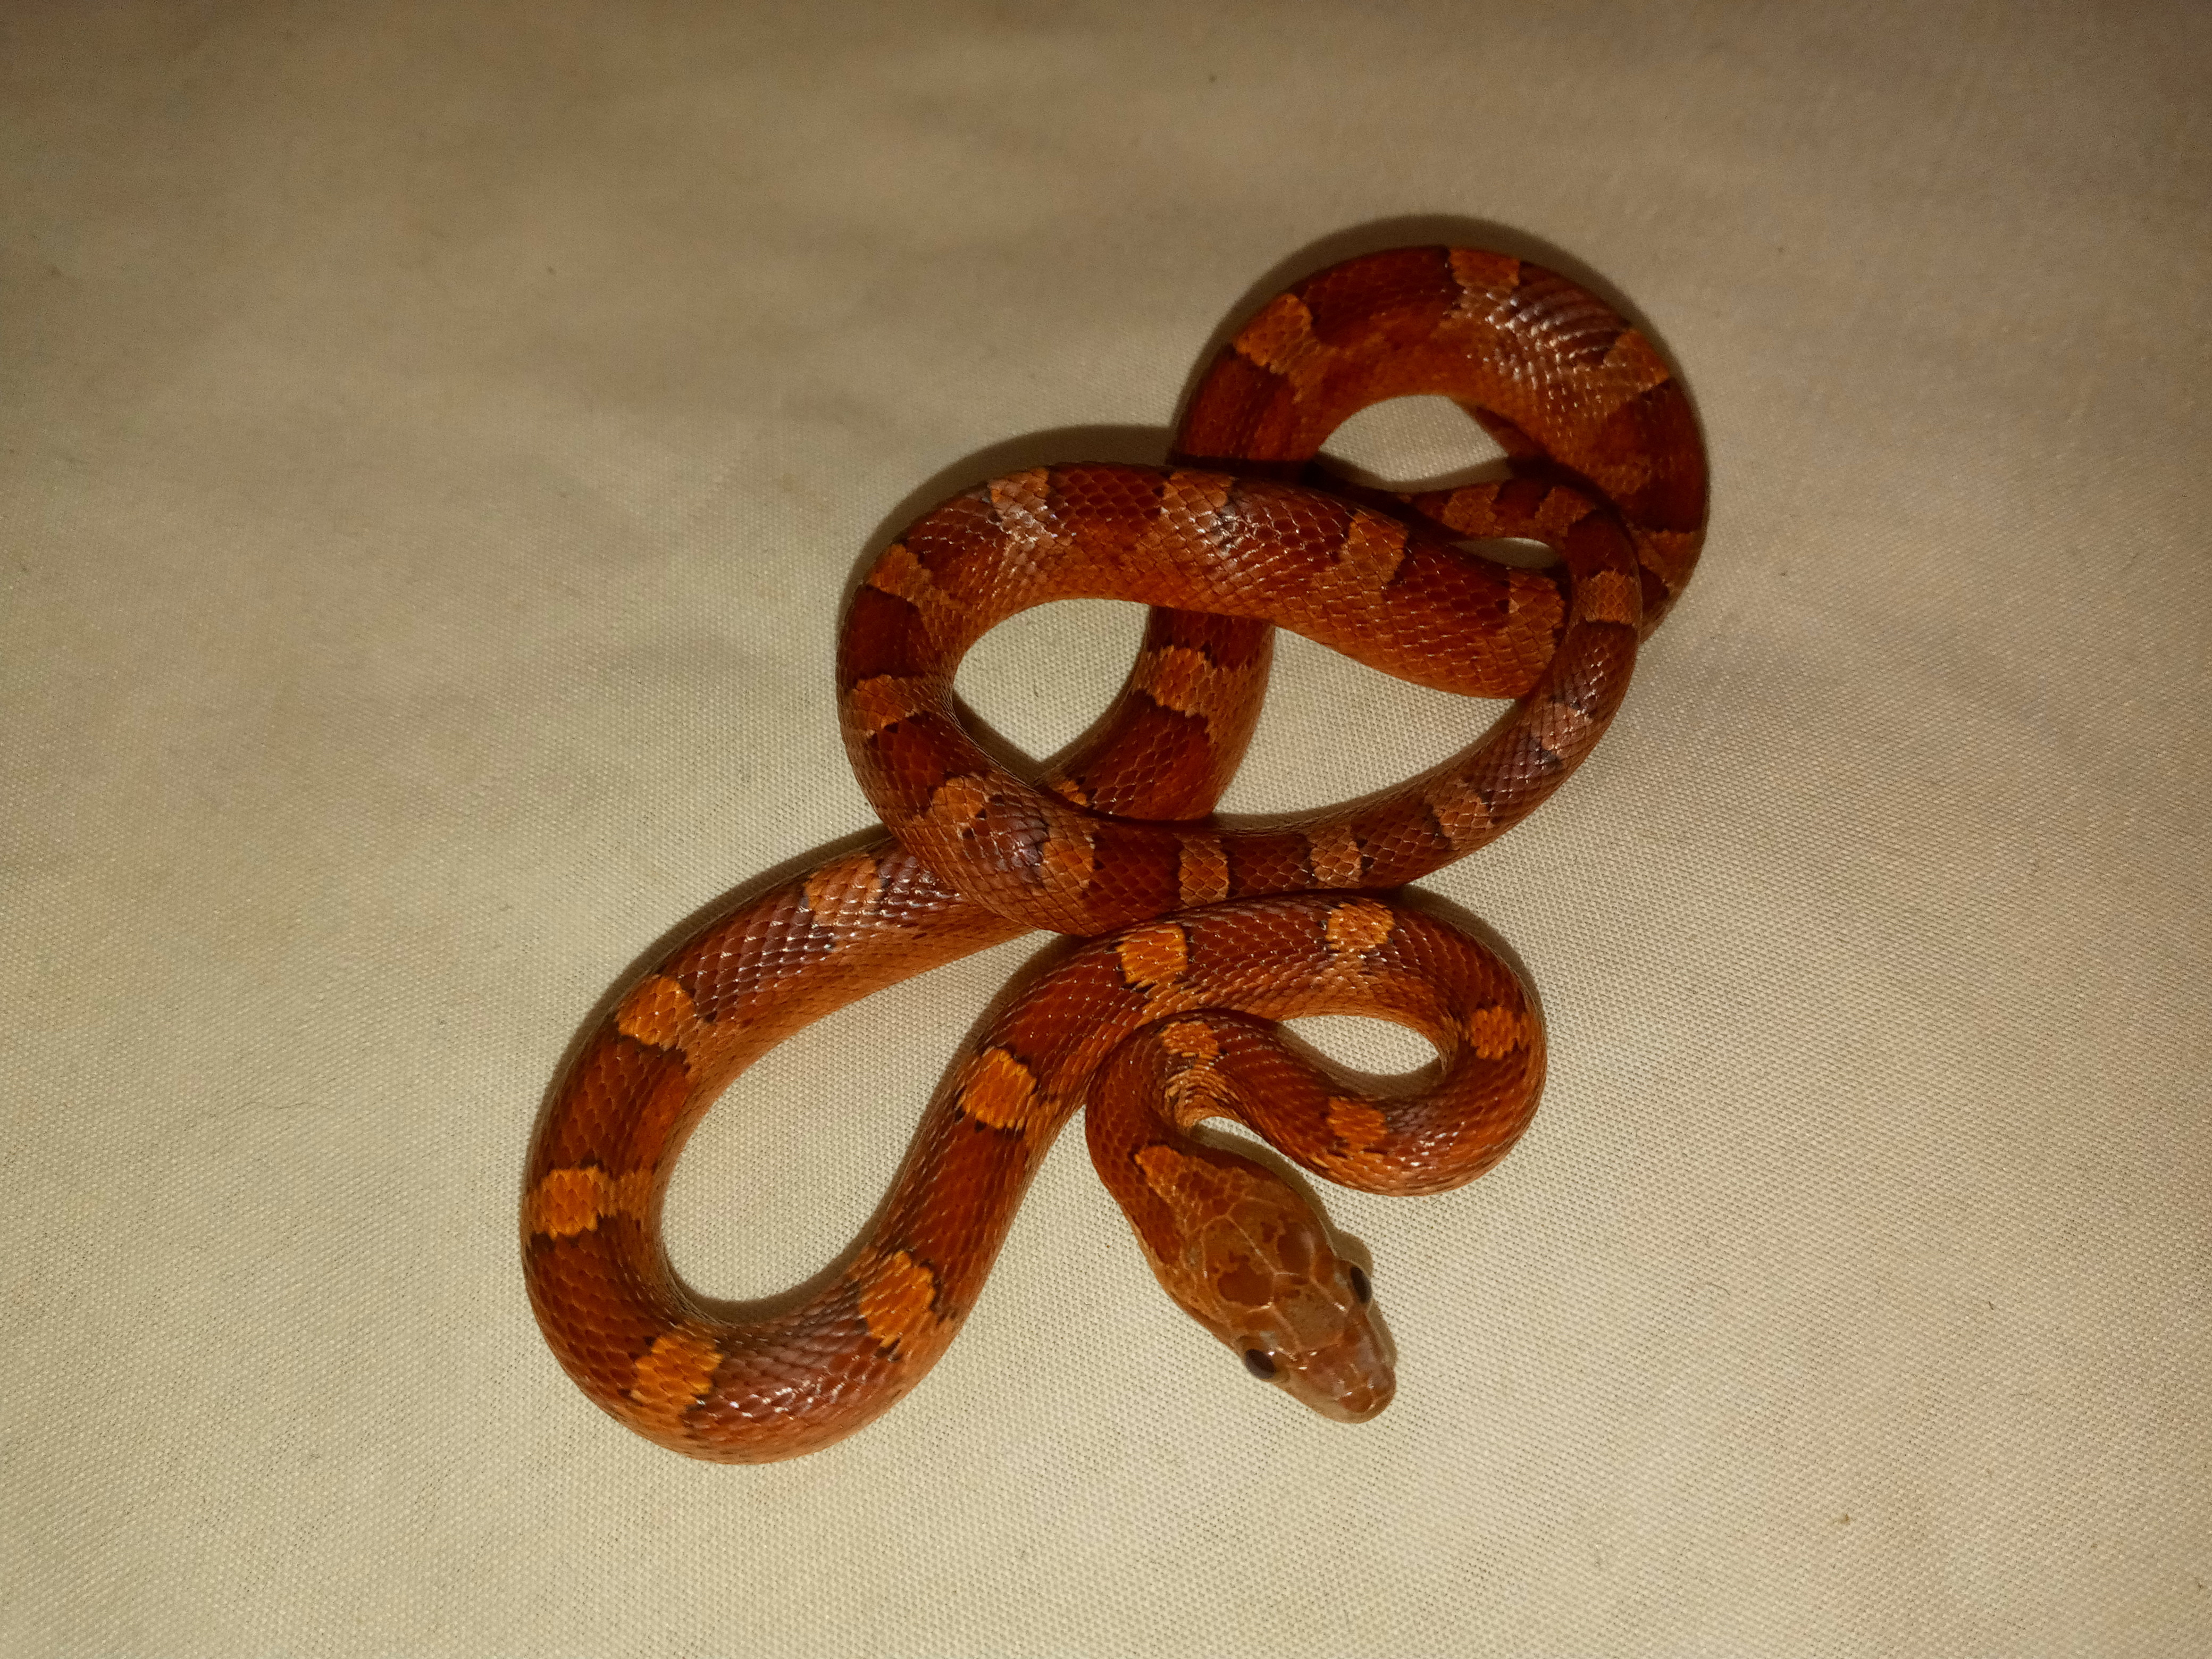 Bloodred Diffused Corn Snake by D&J Snake House